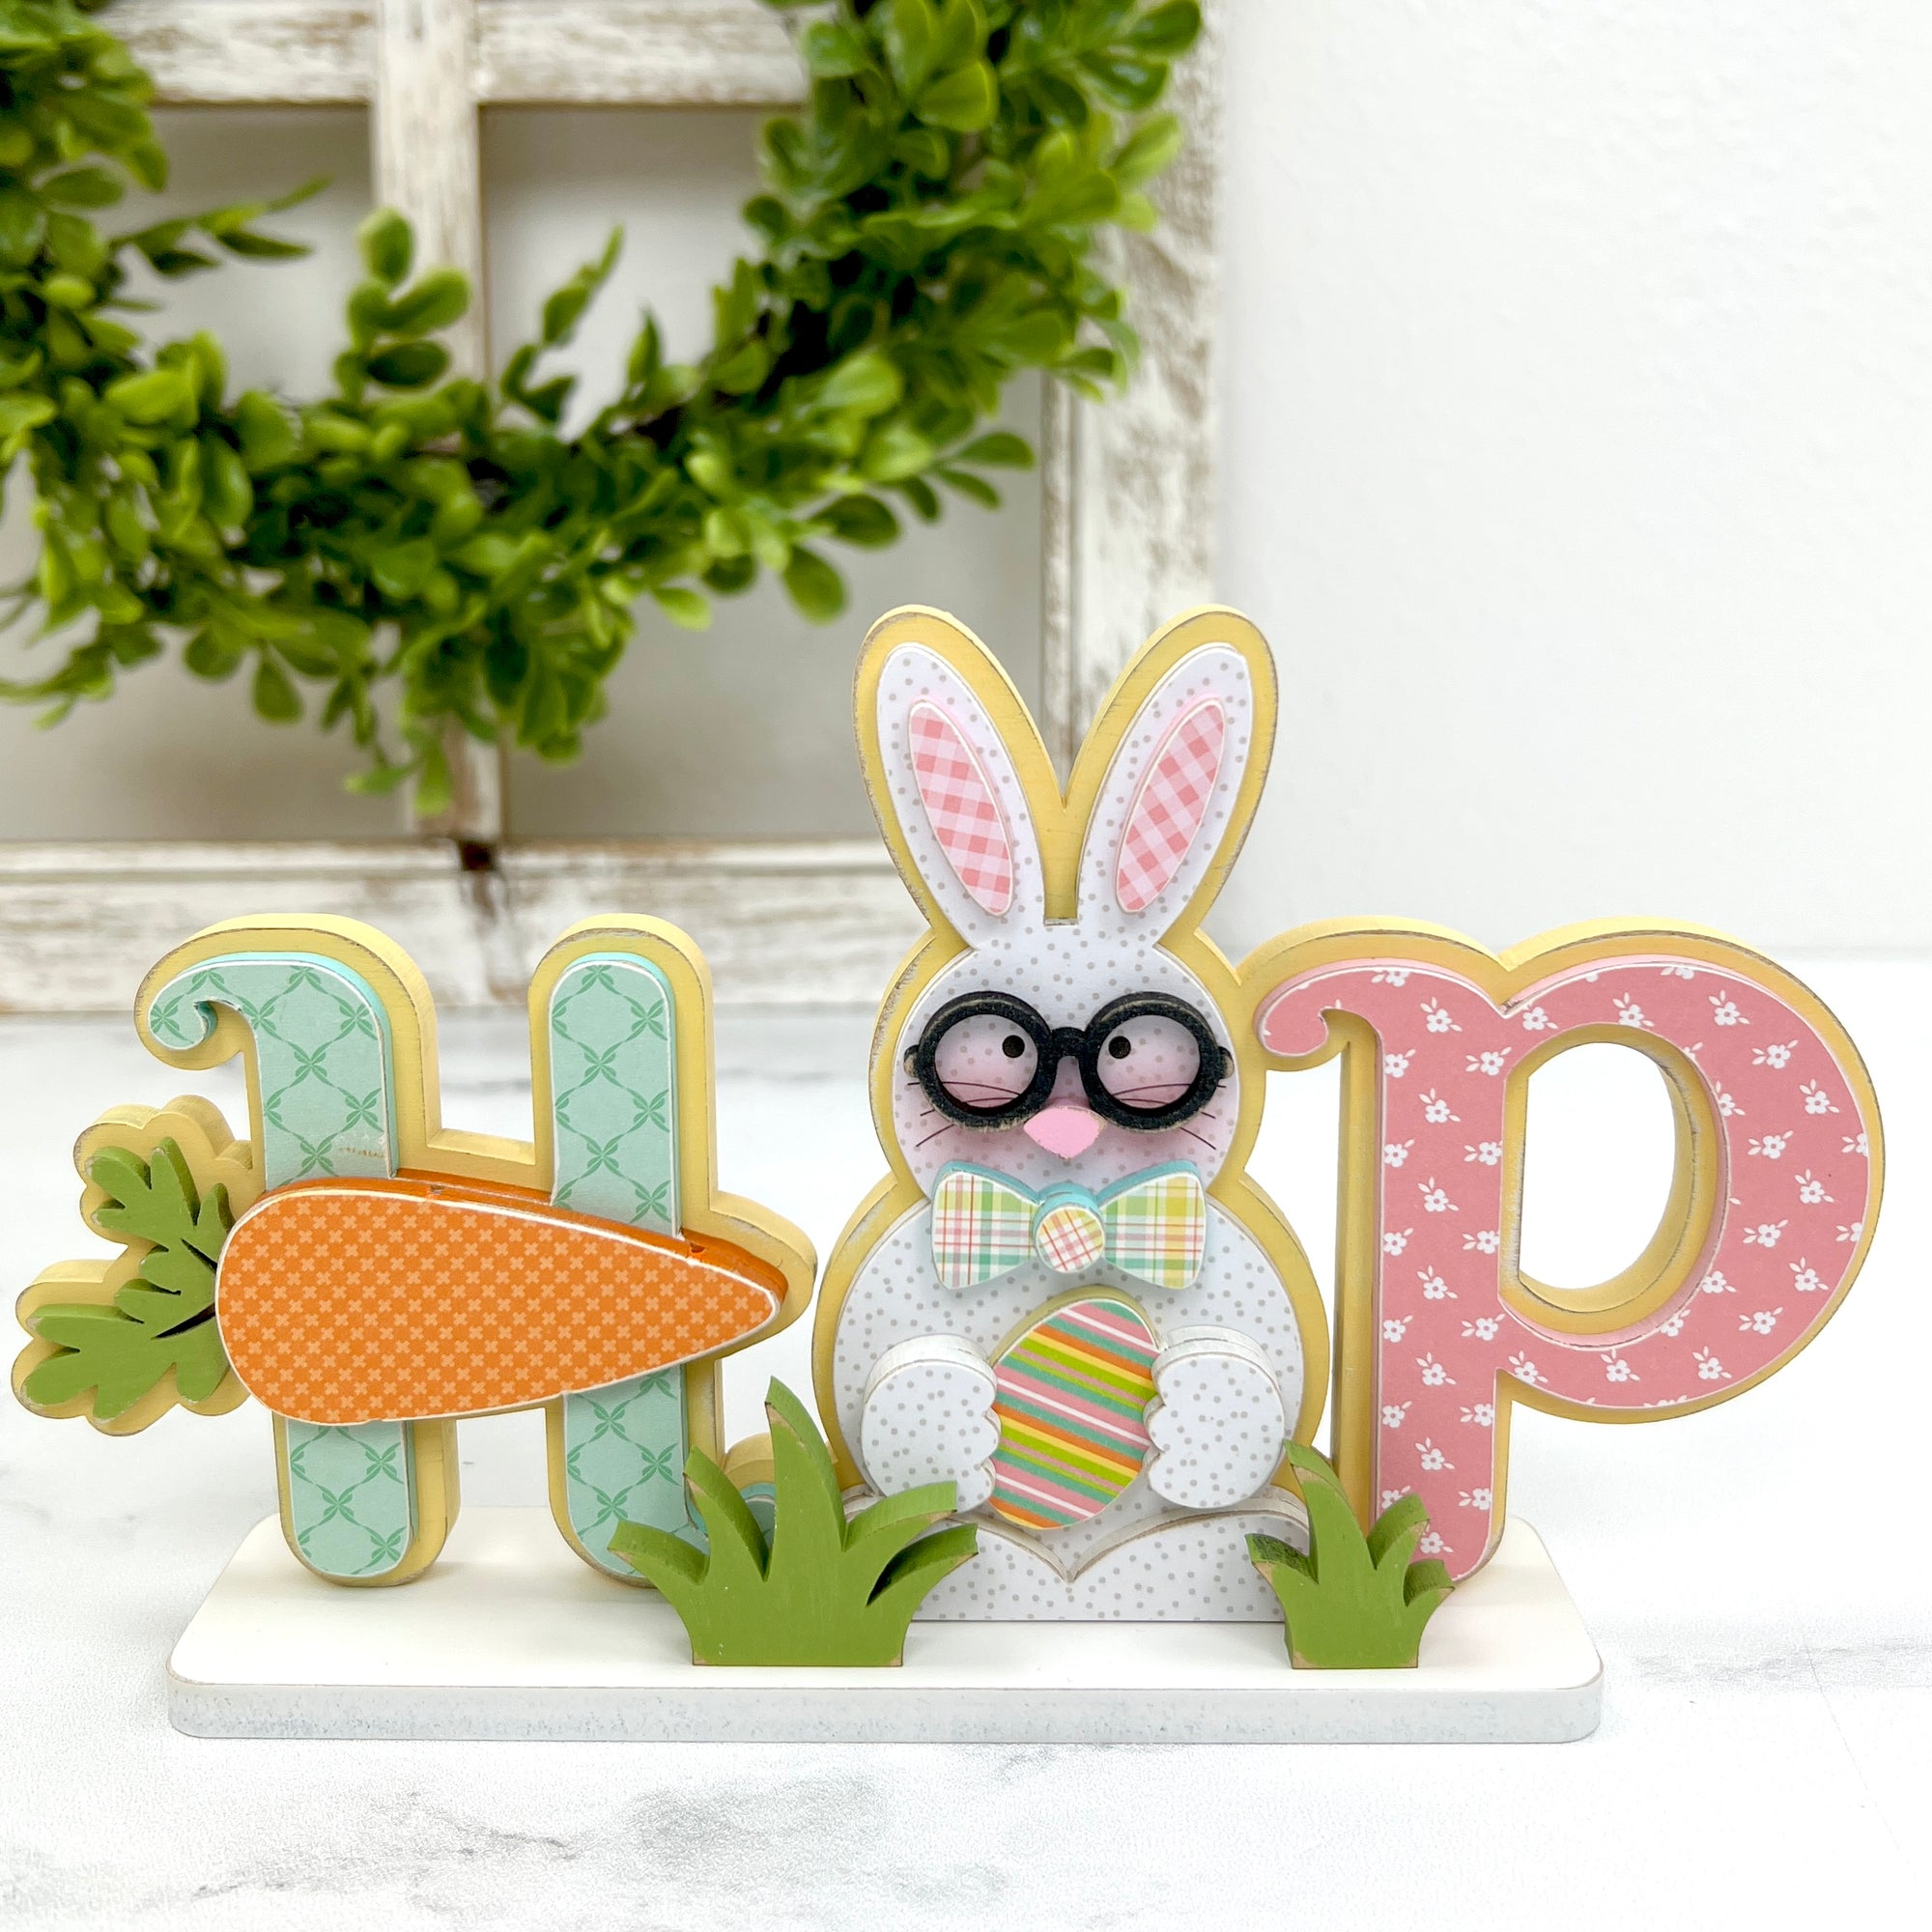 Wood bunny and carrot easter decor that spells the word HOP in spring colors